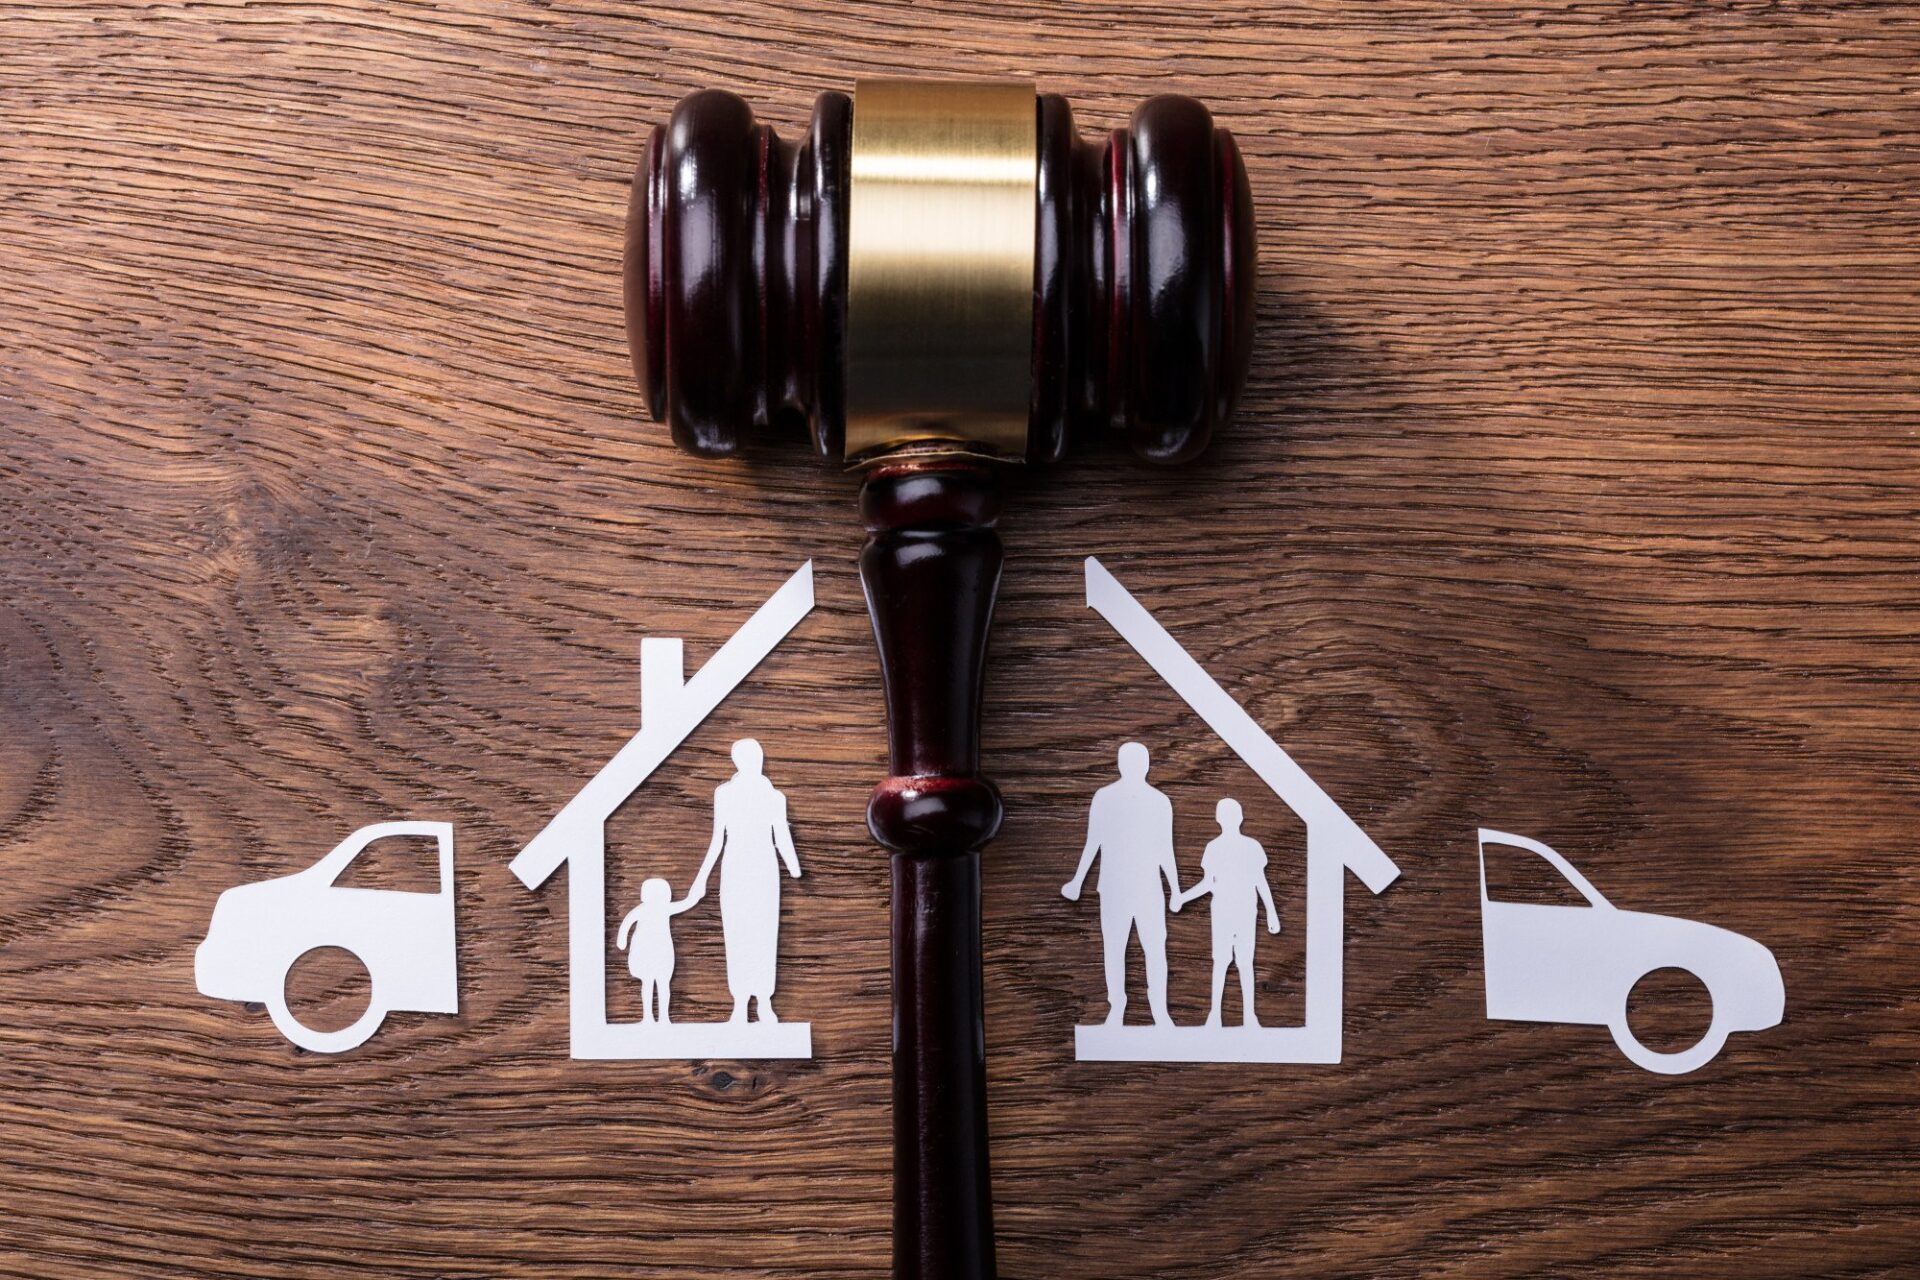 family-law-attorney